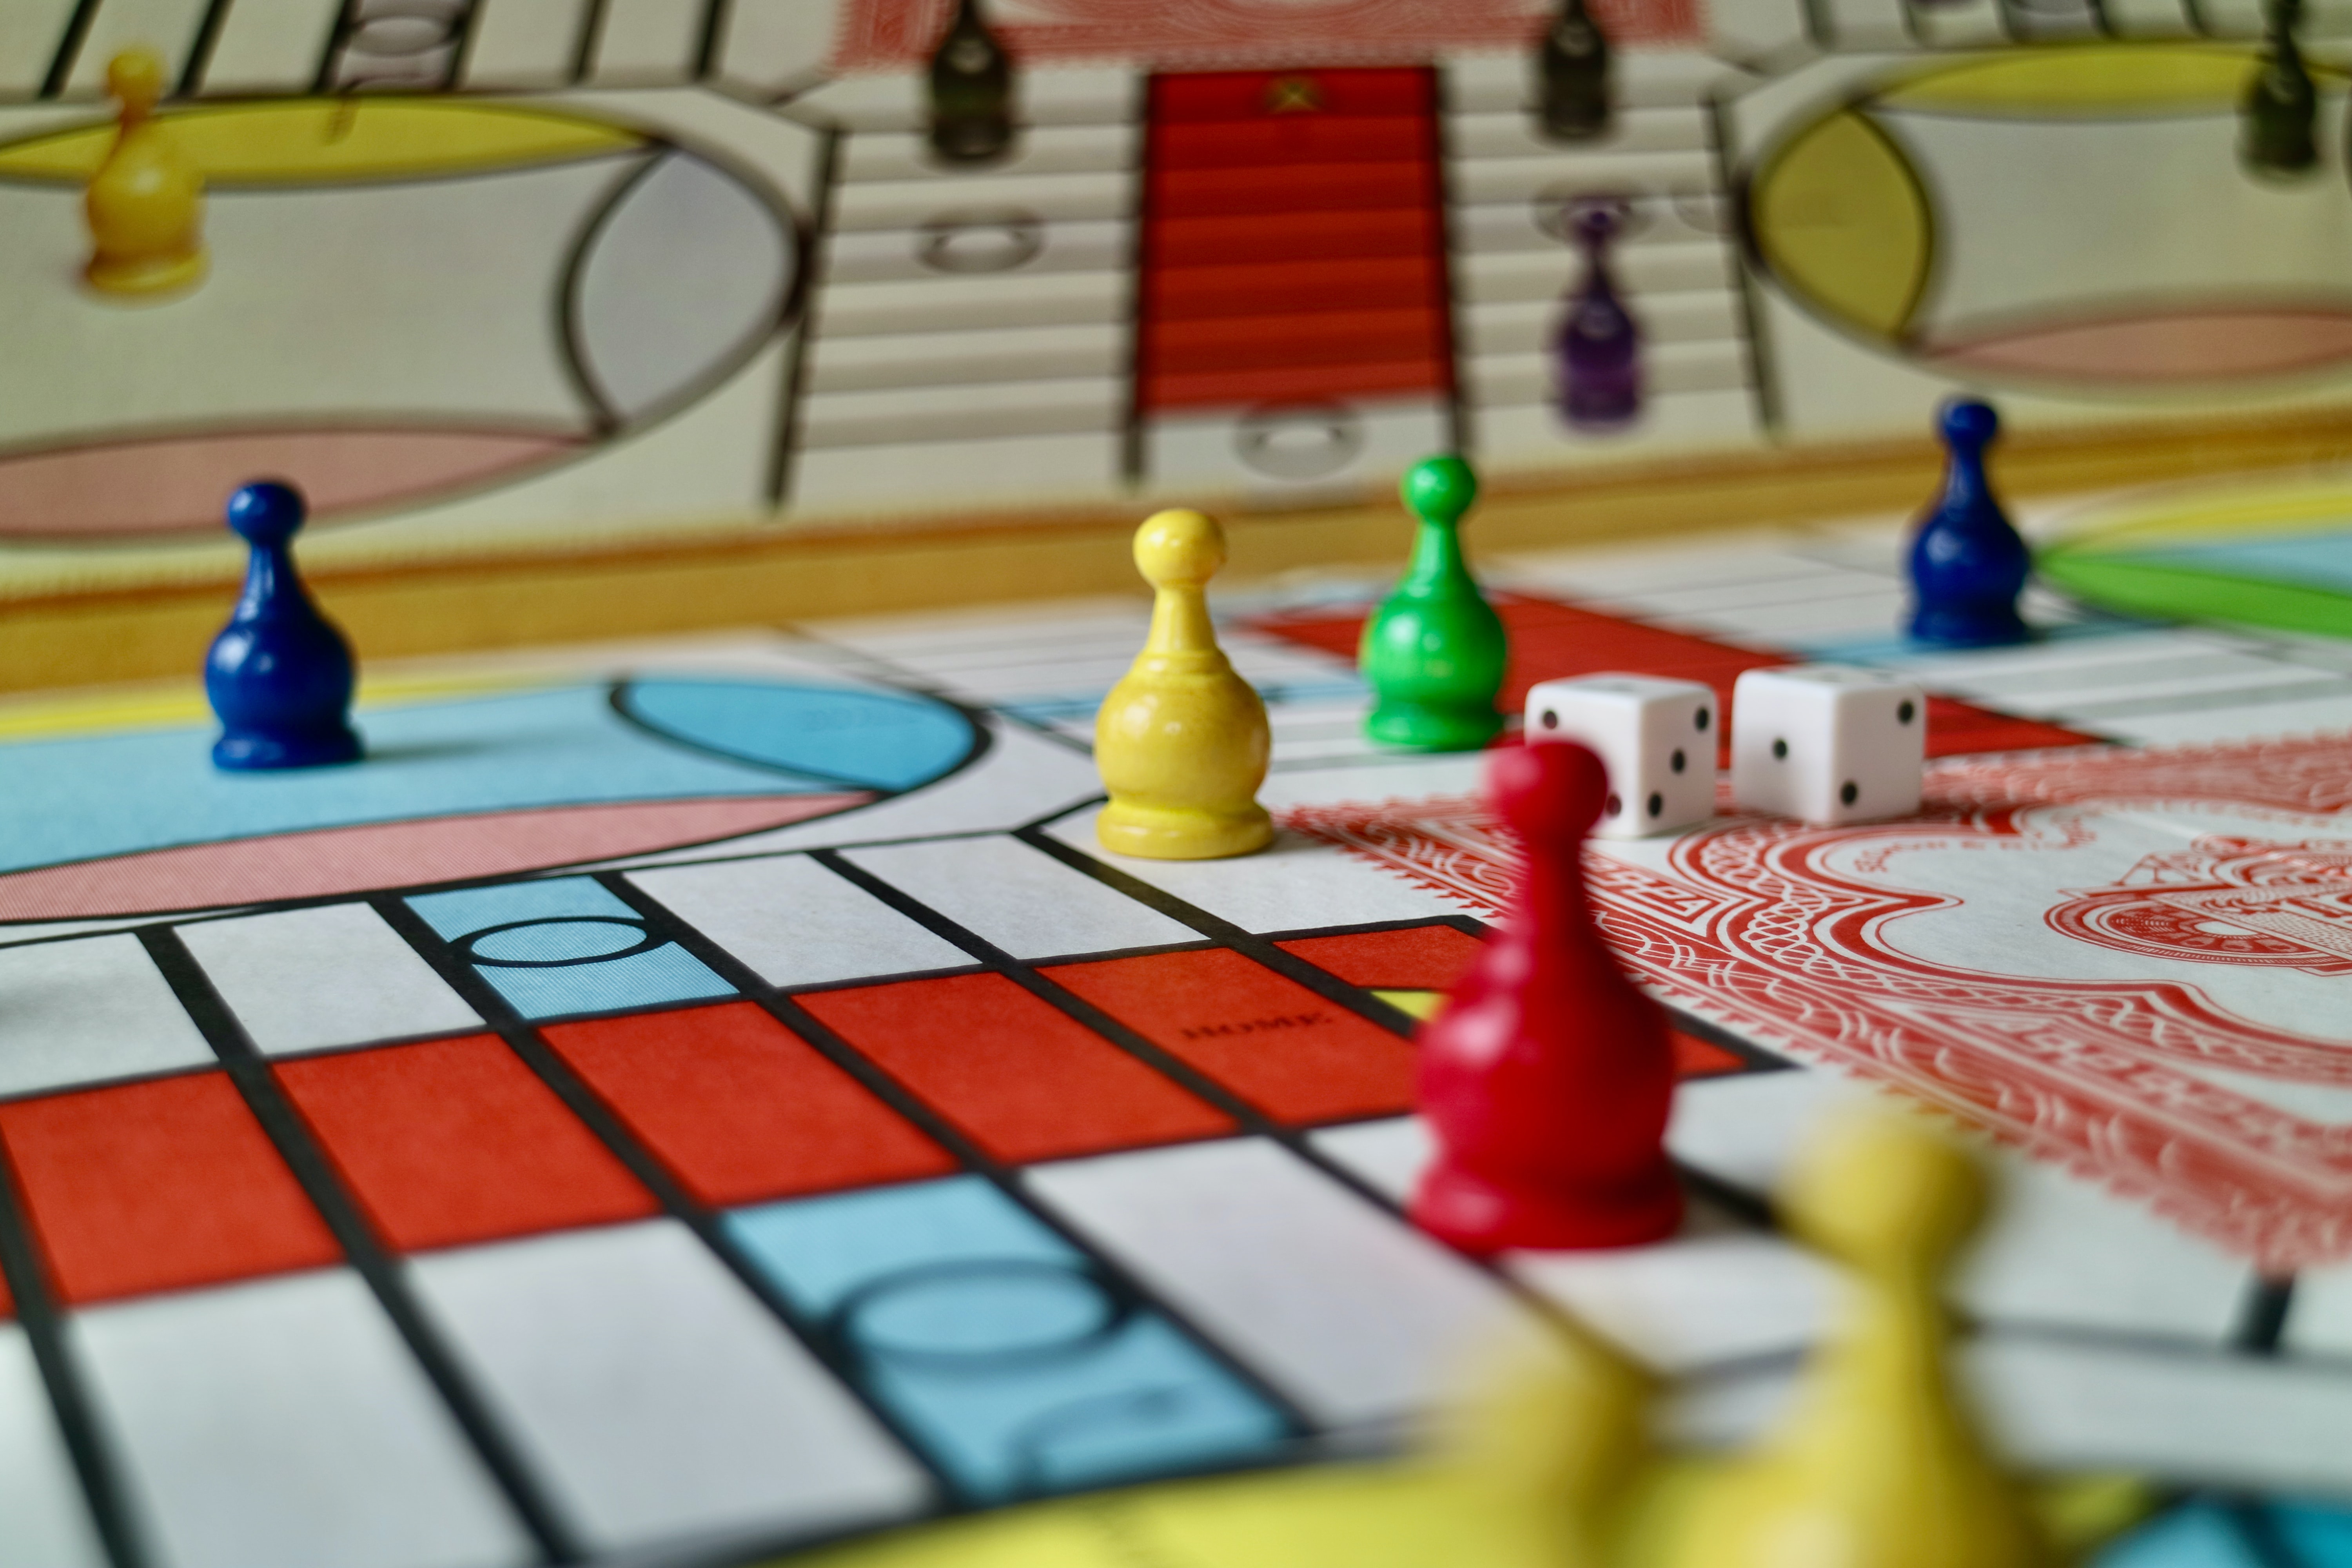 Top 3 Board Games for Christmas